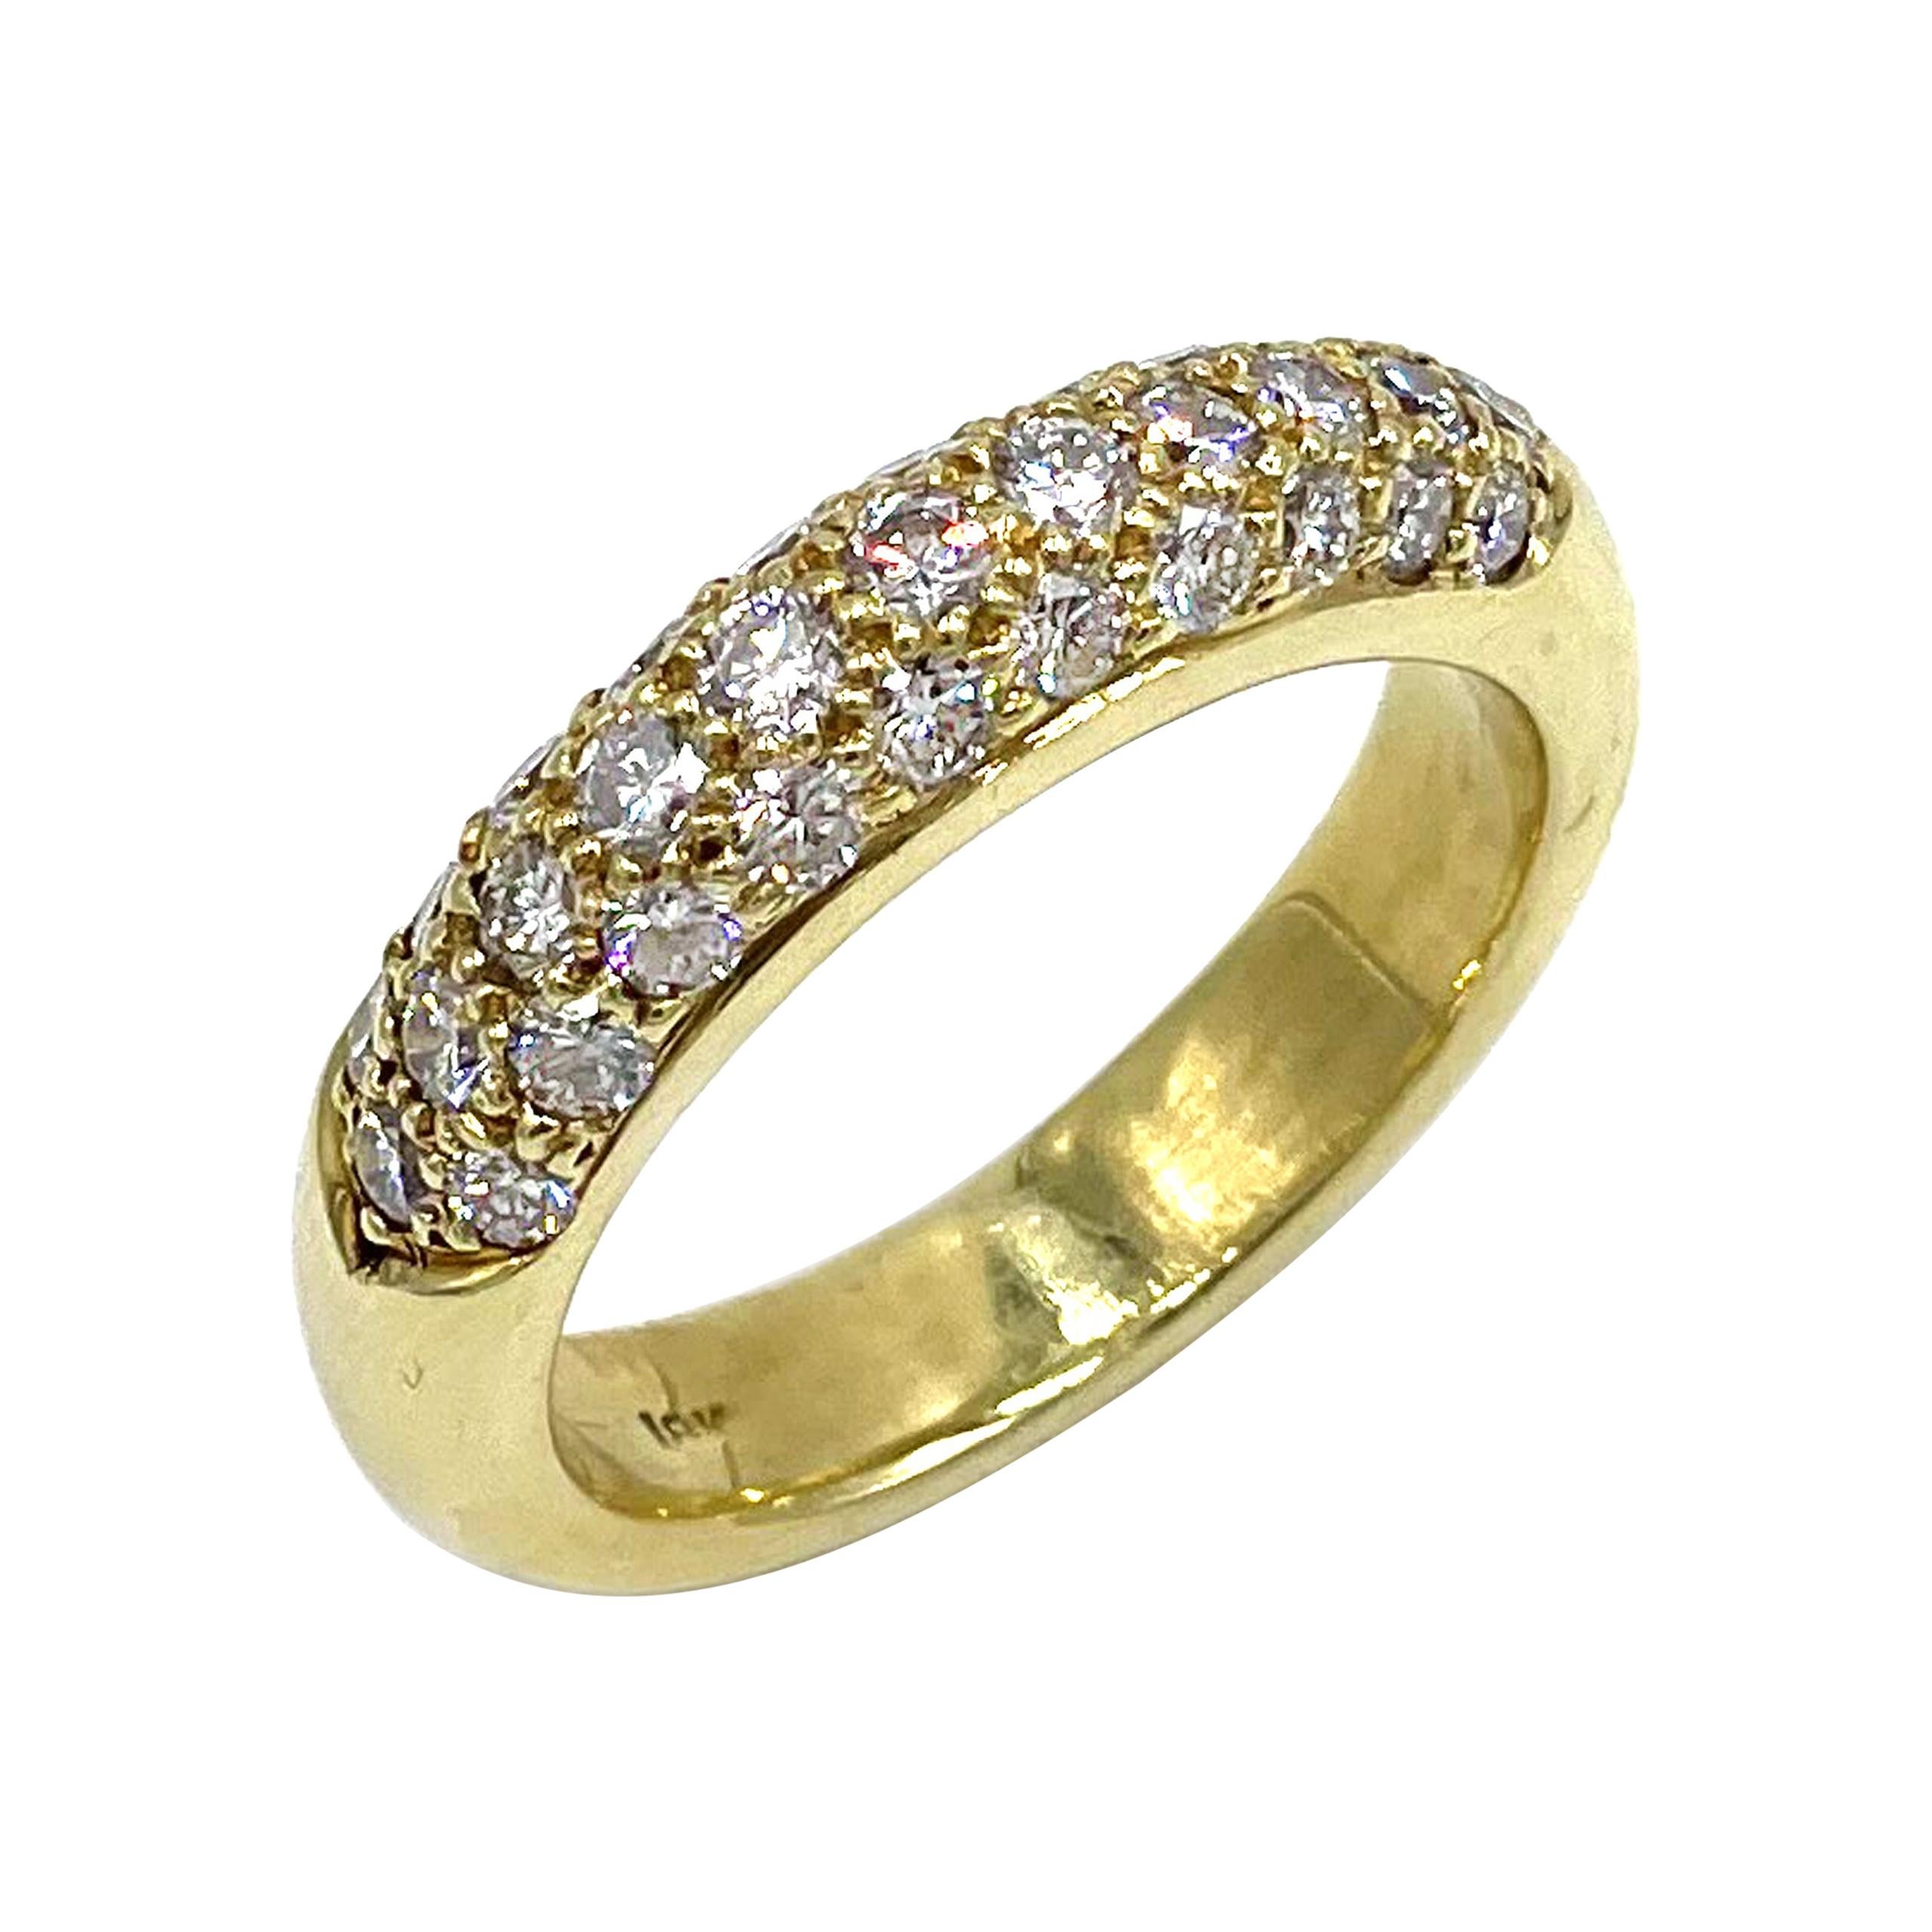 Ladies gold dome ring oval cz 18kt steel dress pave pretty fancy all sizes 868 